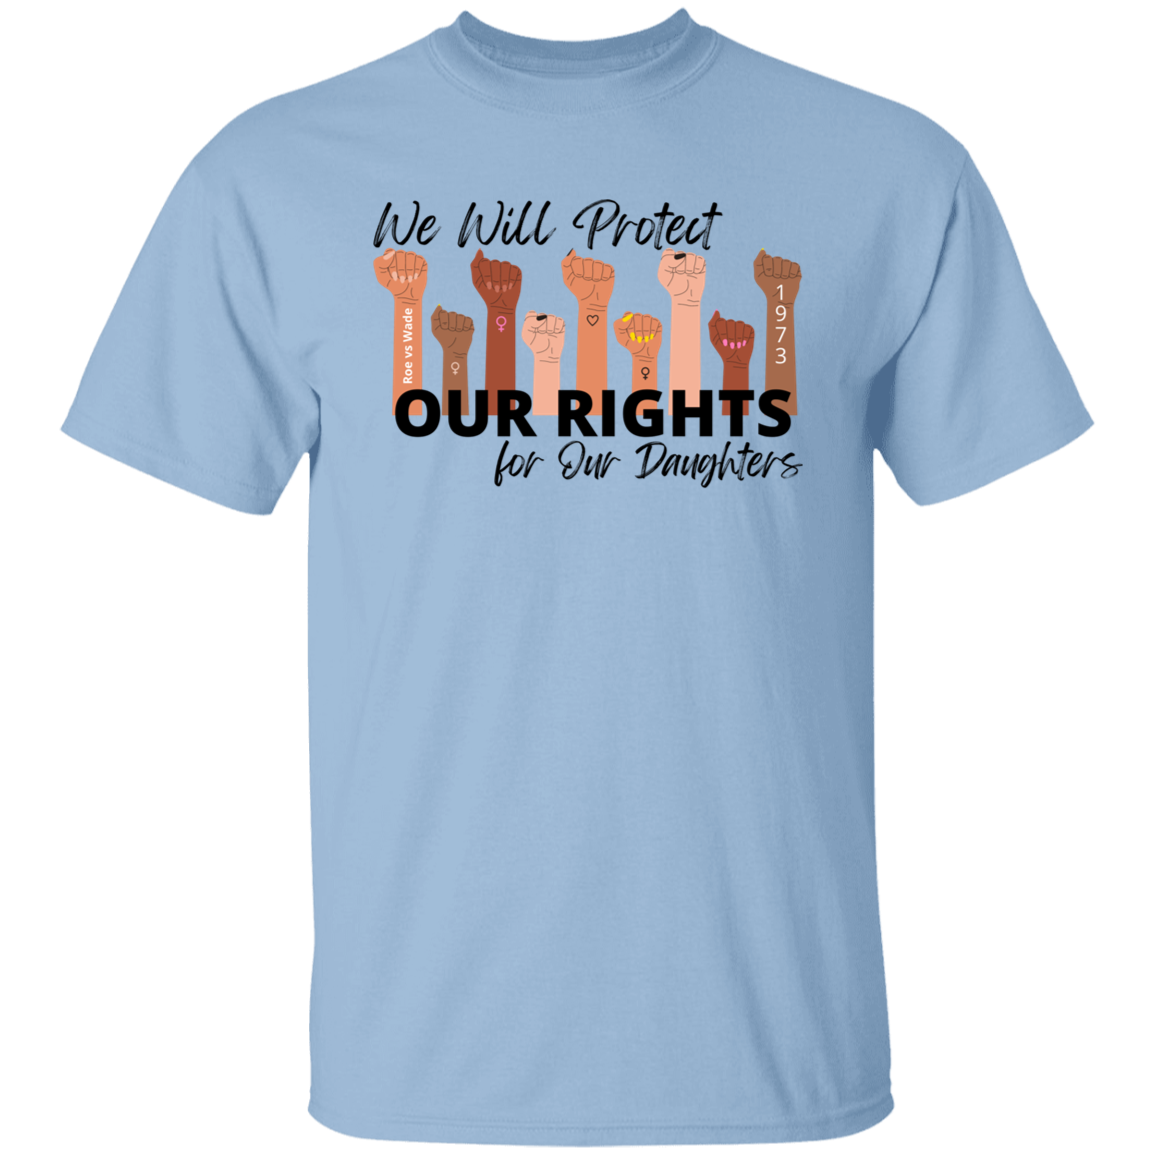 We Will Protect Our Rights Unisex T-Shirt Black